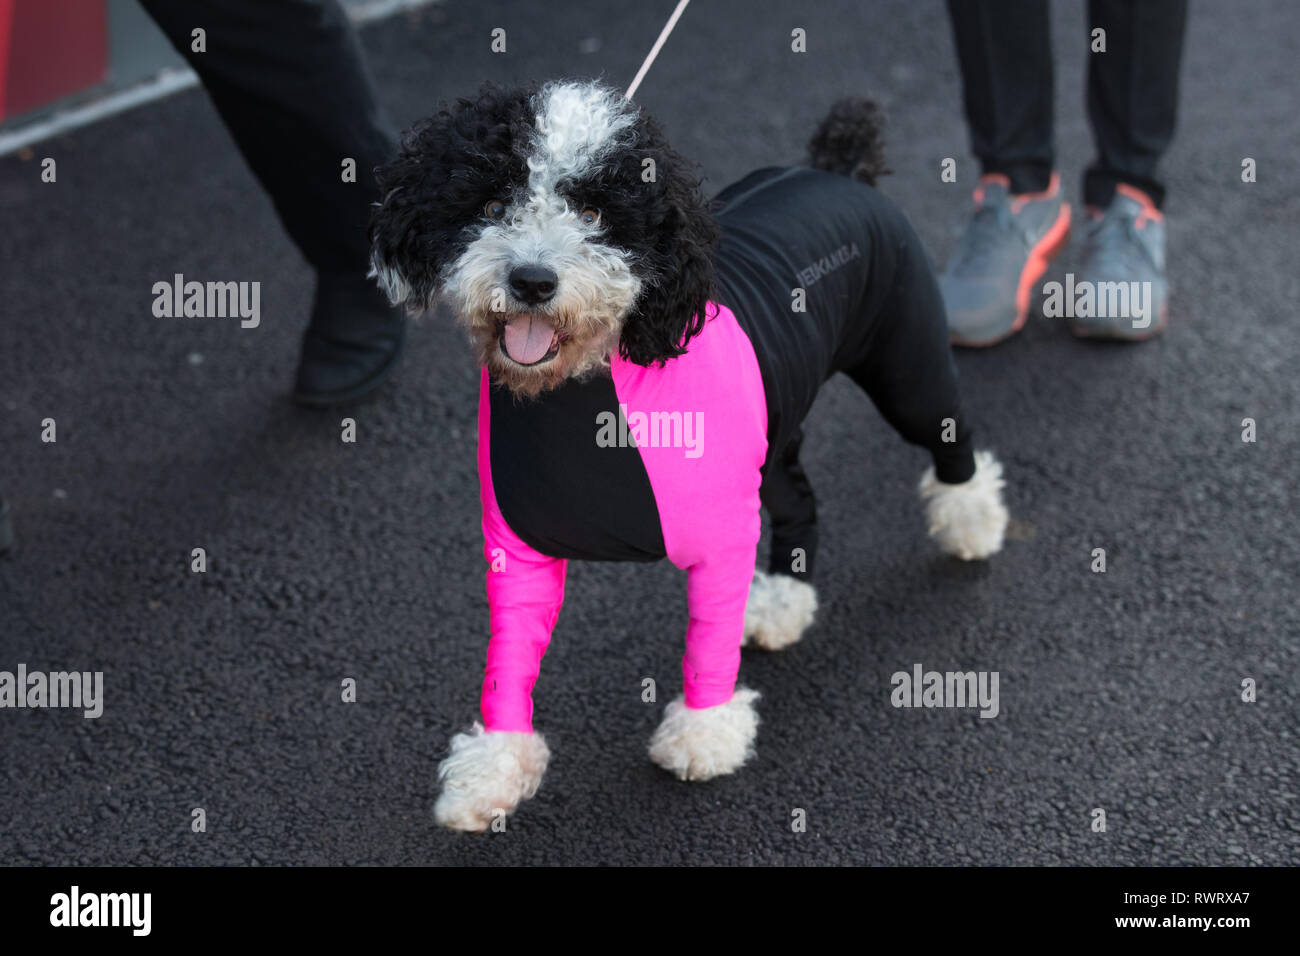 A dog in a pink neon coat arrives at the Birmingham National Exhibition Centre (NEC) for the first day of the Crufts Dog Show. Stock Photo